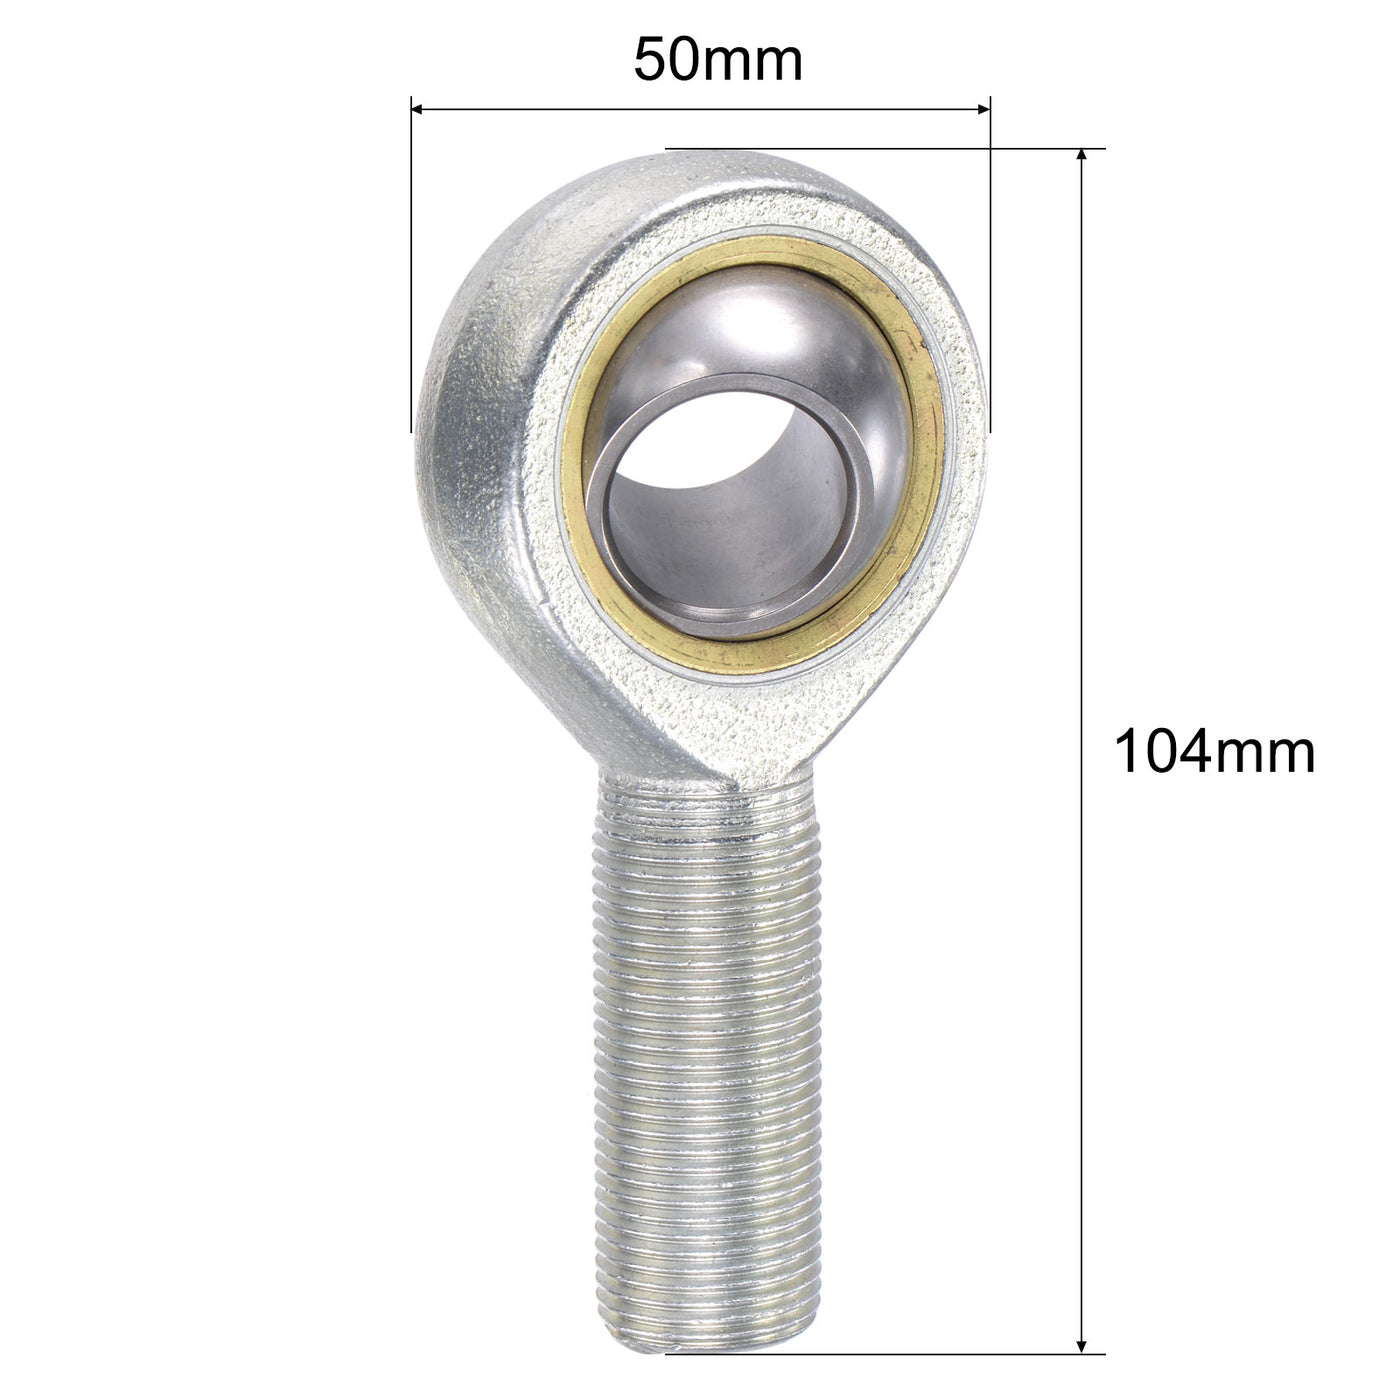 uxcell Uxcell SA20TK POSA20 Rod End Bearing 20mm Bore M20x1.5 Right Hand Male Thread